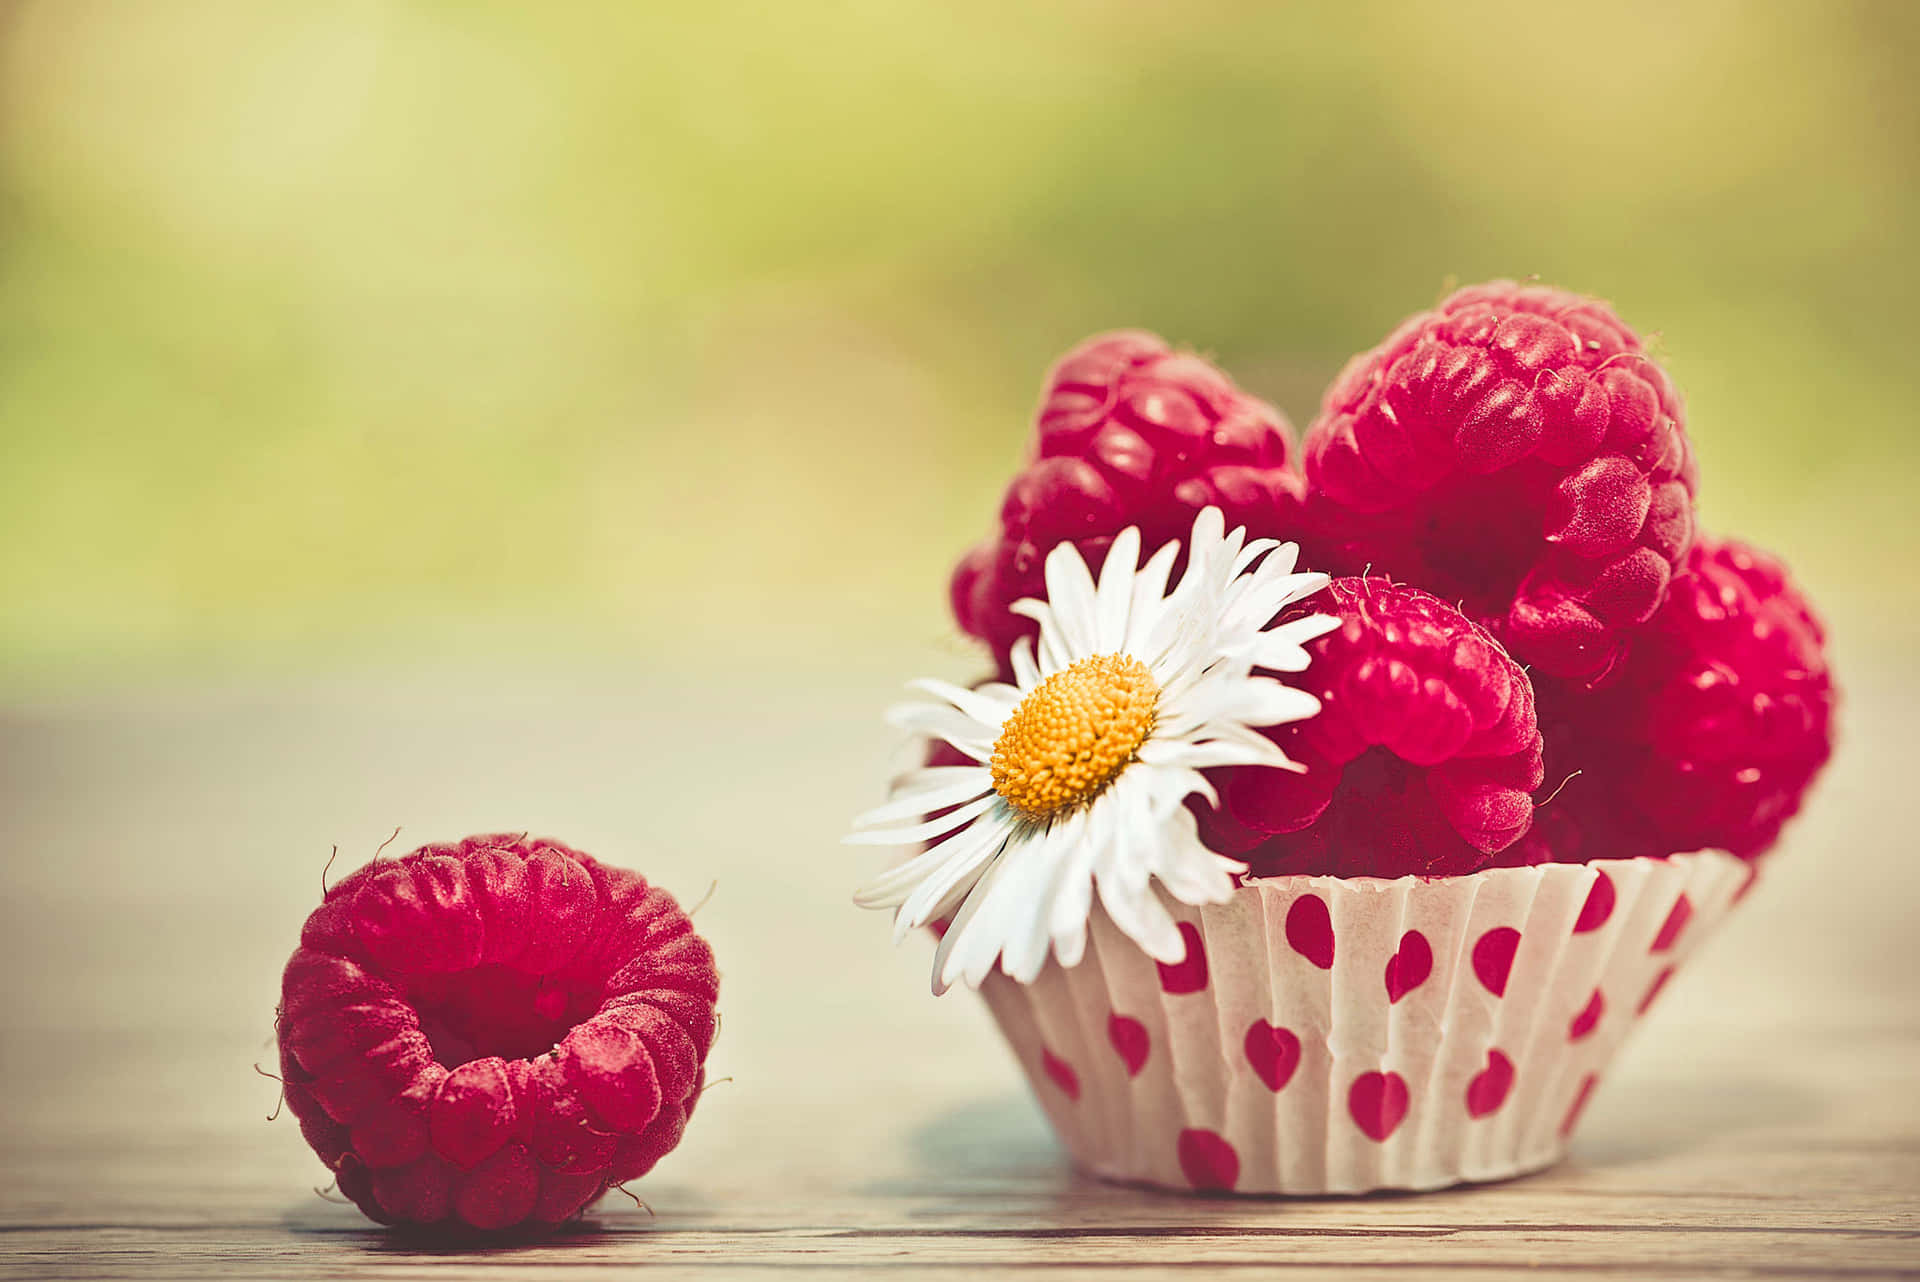 Raspberries And Daisies In A Cup